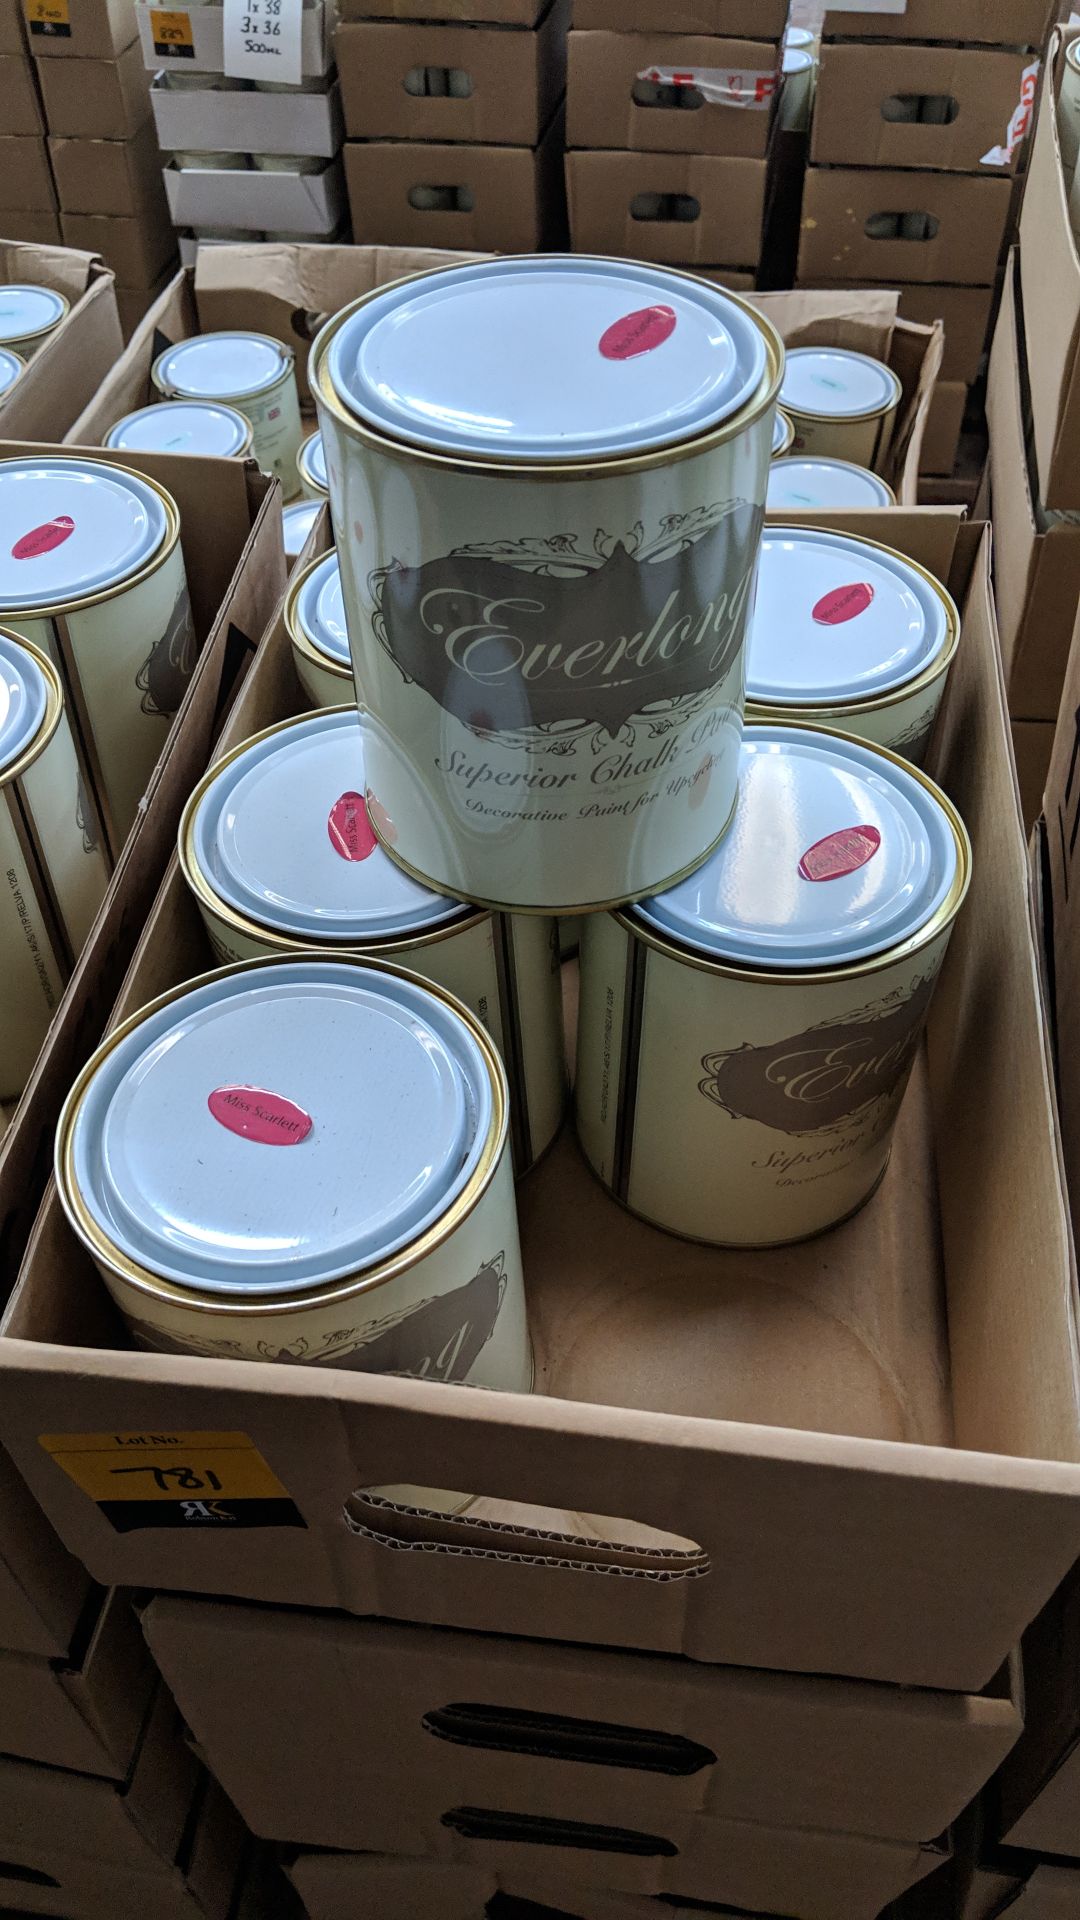 36 off 1 litre tins of Everlong branded superior chalk paint - colour Miss Scarlett This lot is - Image 2 of 2